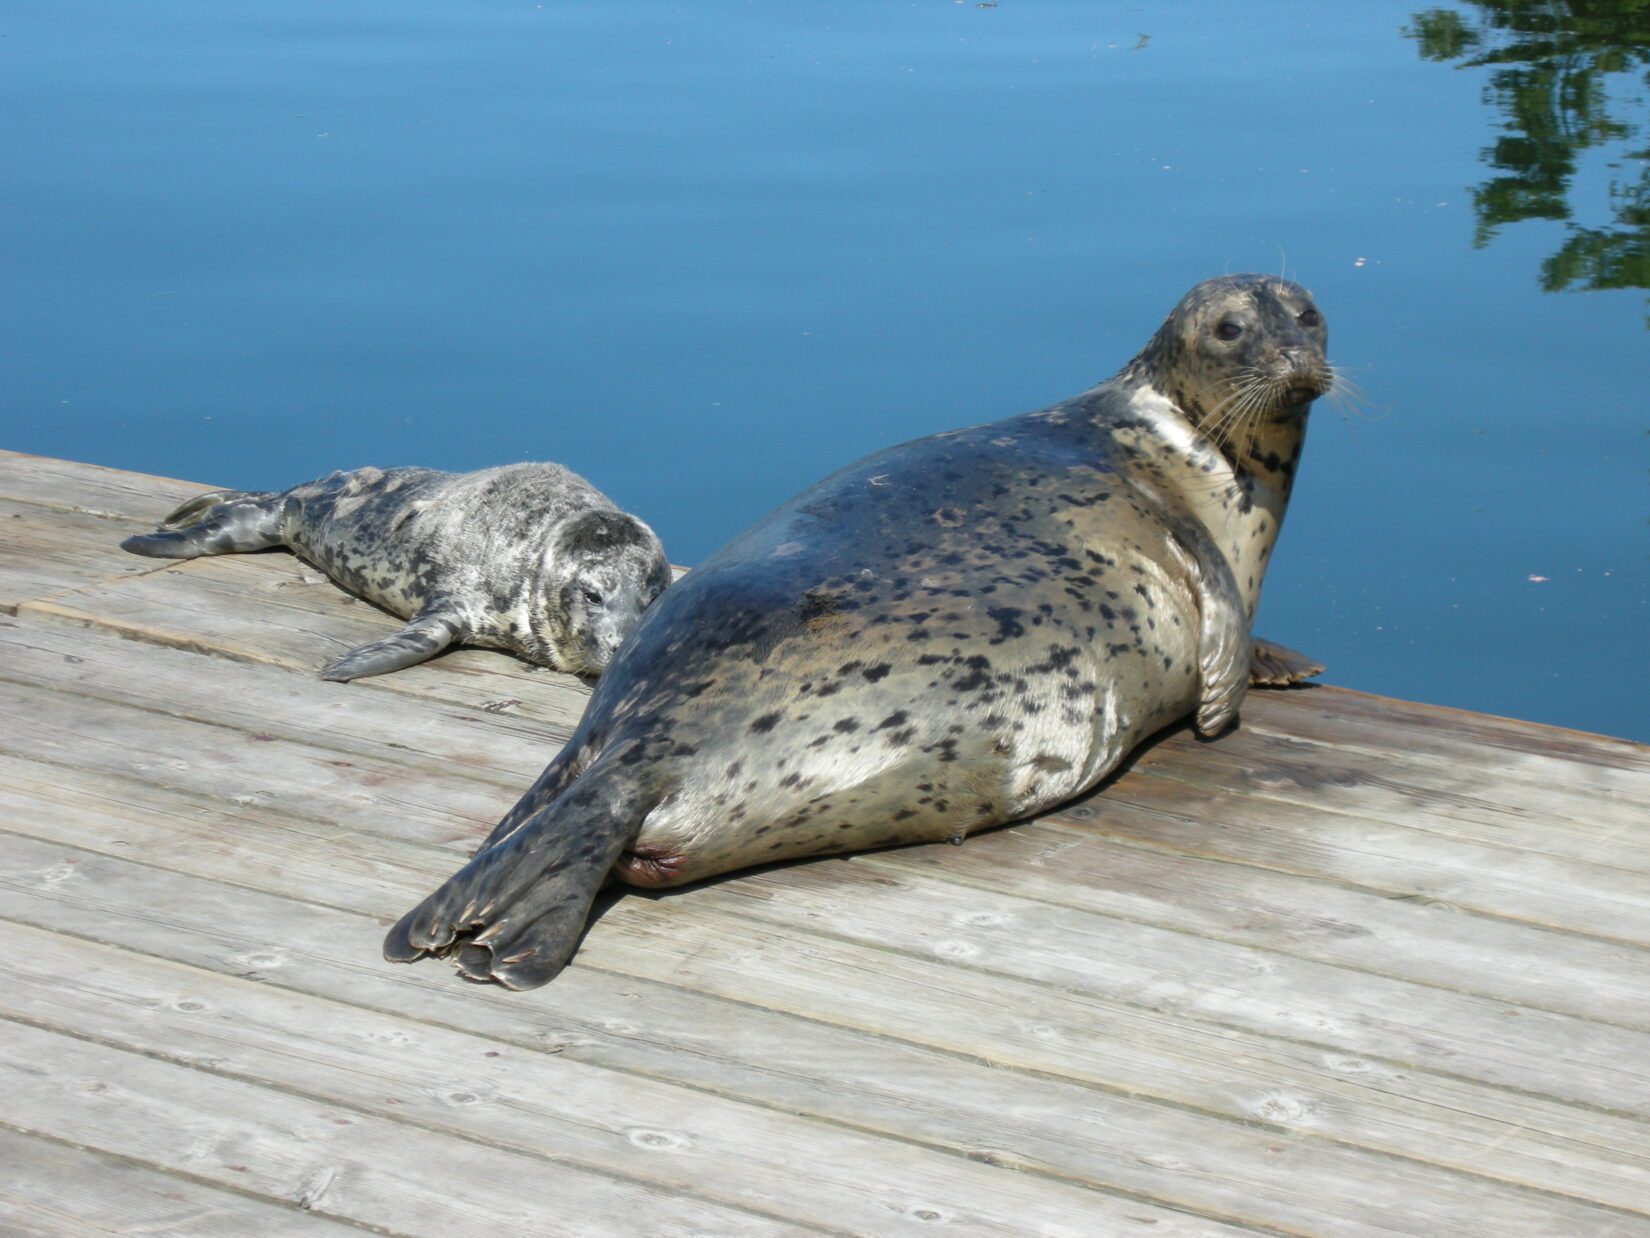 Harbour seal pup with mom on dock